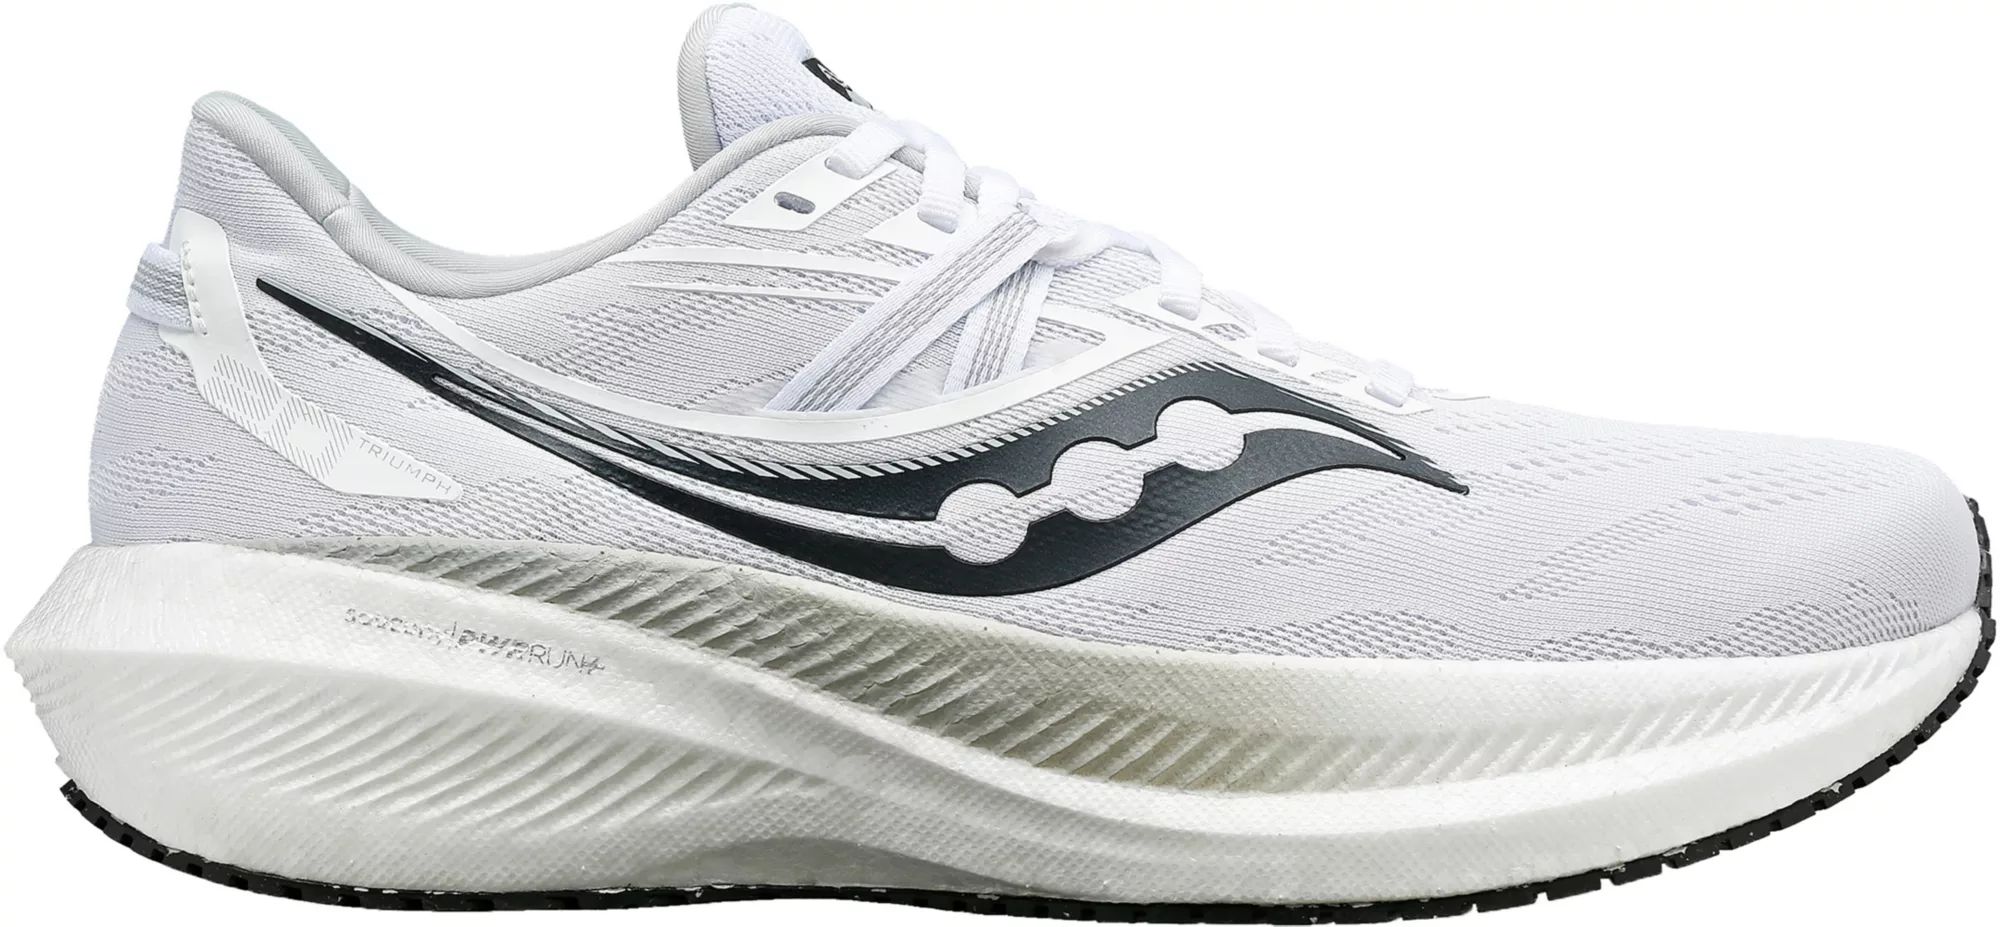 Saucony Women's Triumph 20 Running Shoes, Size 8, White/Black | Dick's Sporting Goods